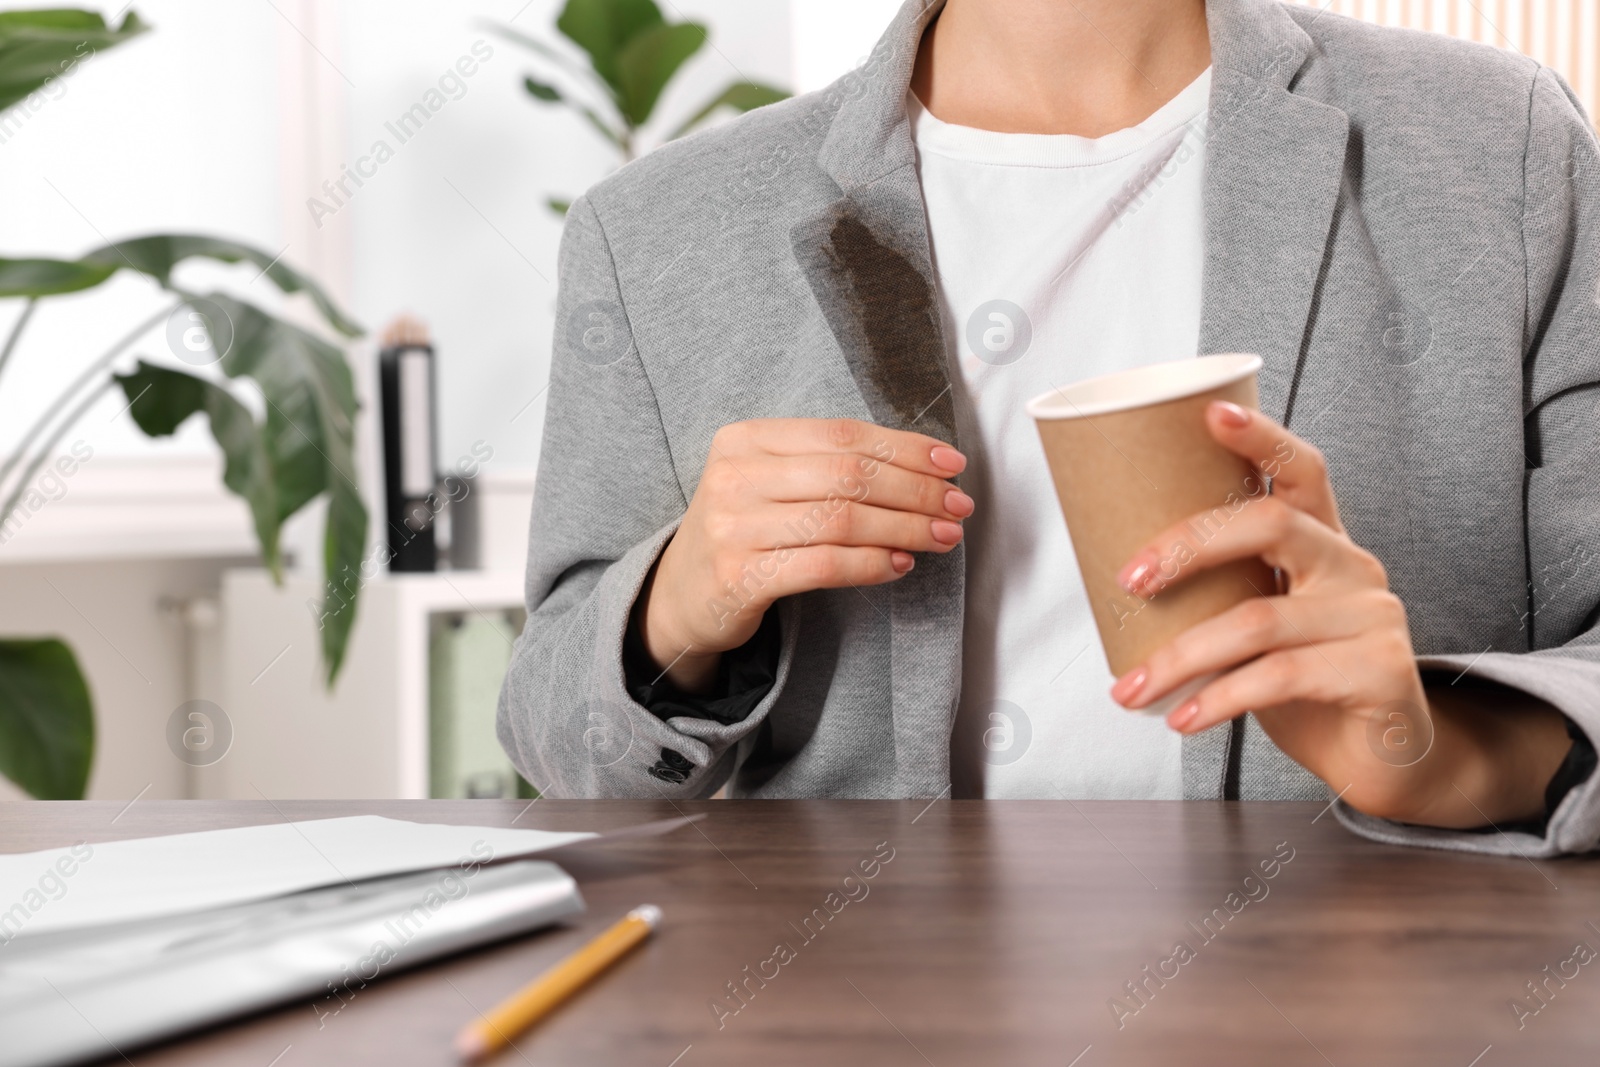 Photo of Woman showing stain from coffee on her jacket at wooden table indoors, closeup